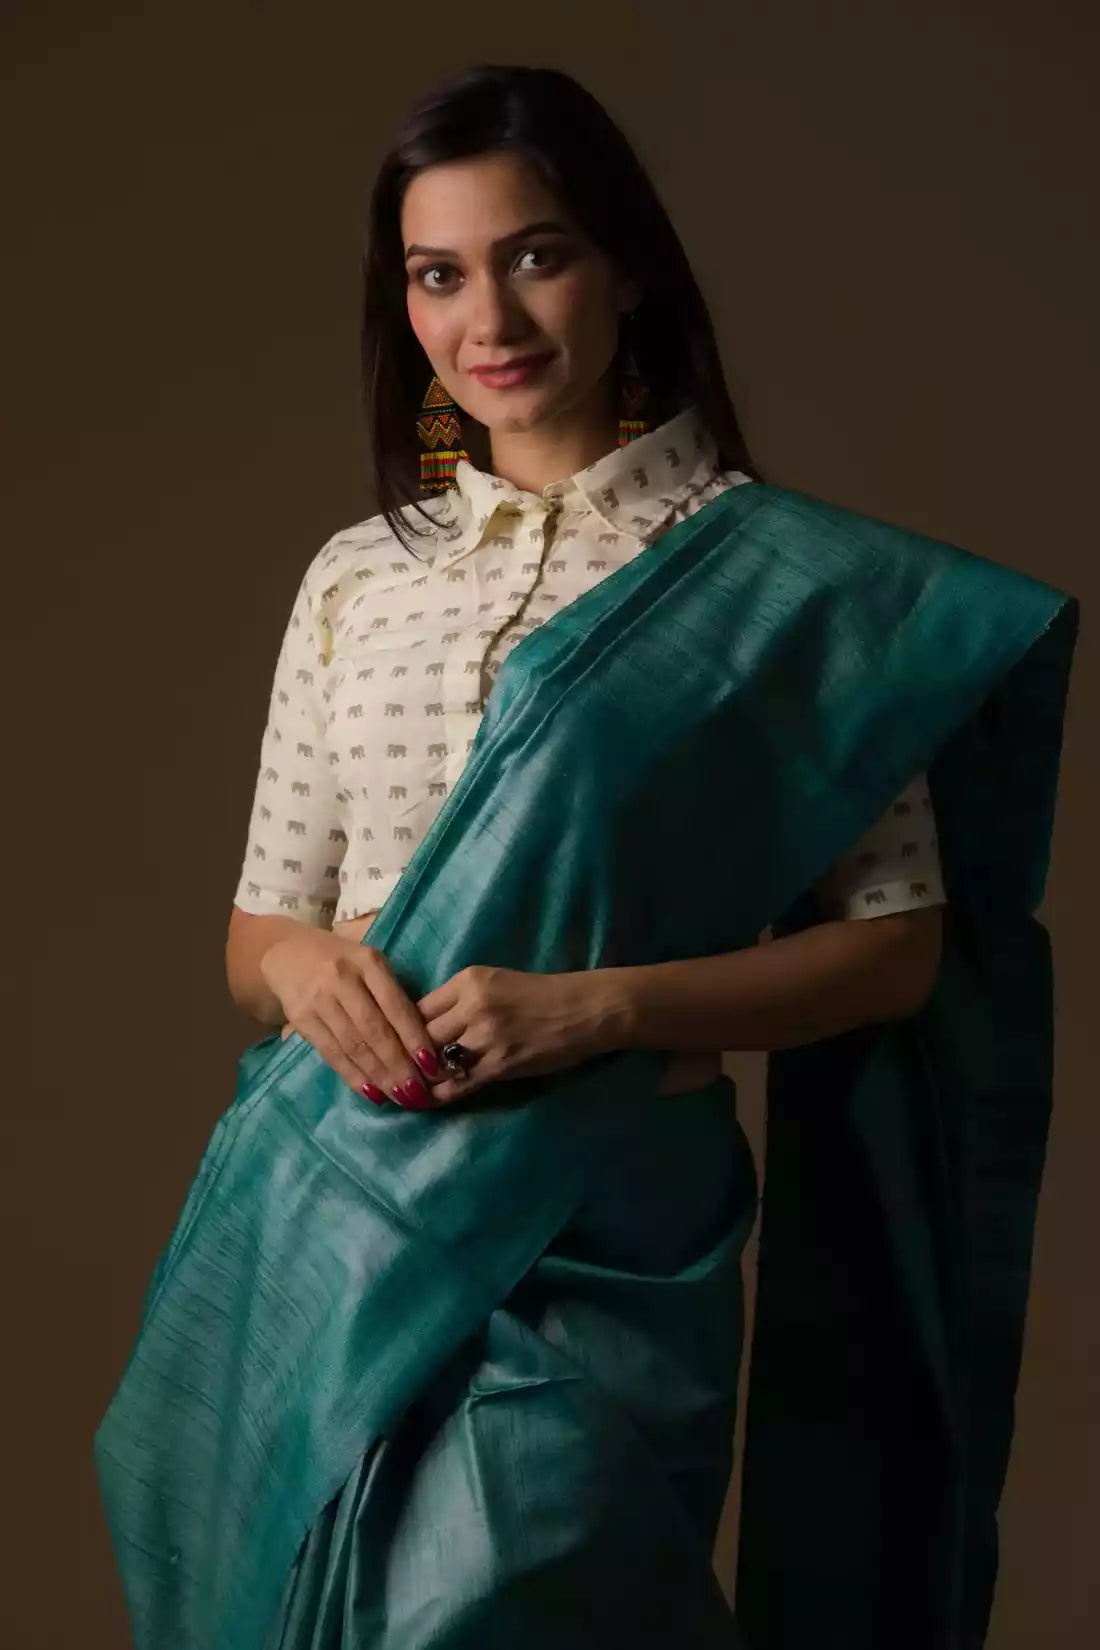 A lady in Sea green Plain In Pure Tussar Saree standing against a brown background.